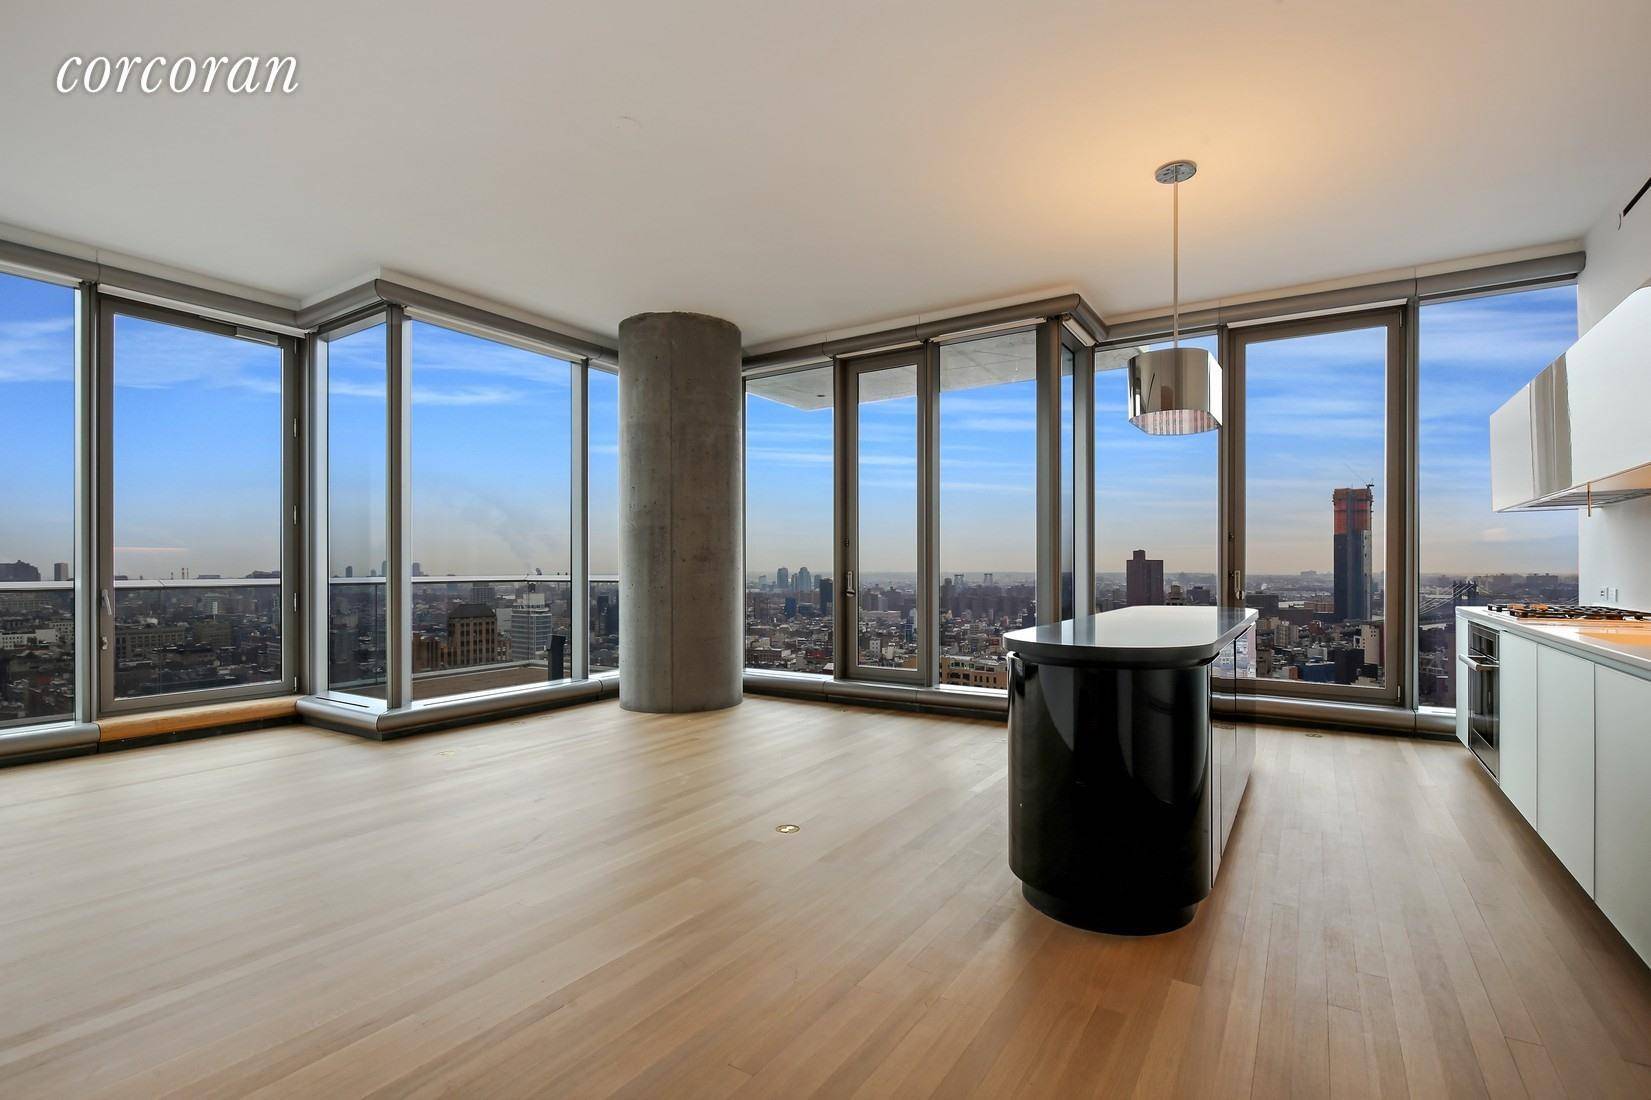 This stunning, generously sized three bedroom, three and one half bathroom apartment with spectacular views from every window, and a 24 8 foot balcony is available for rent at the ...